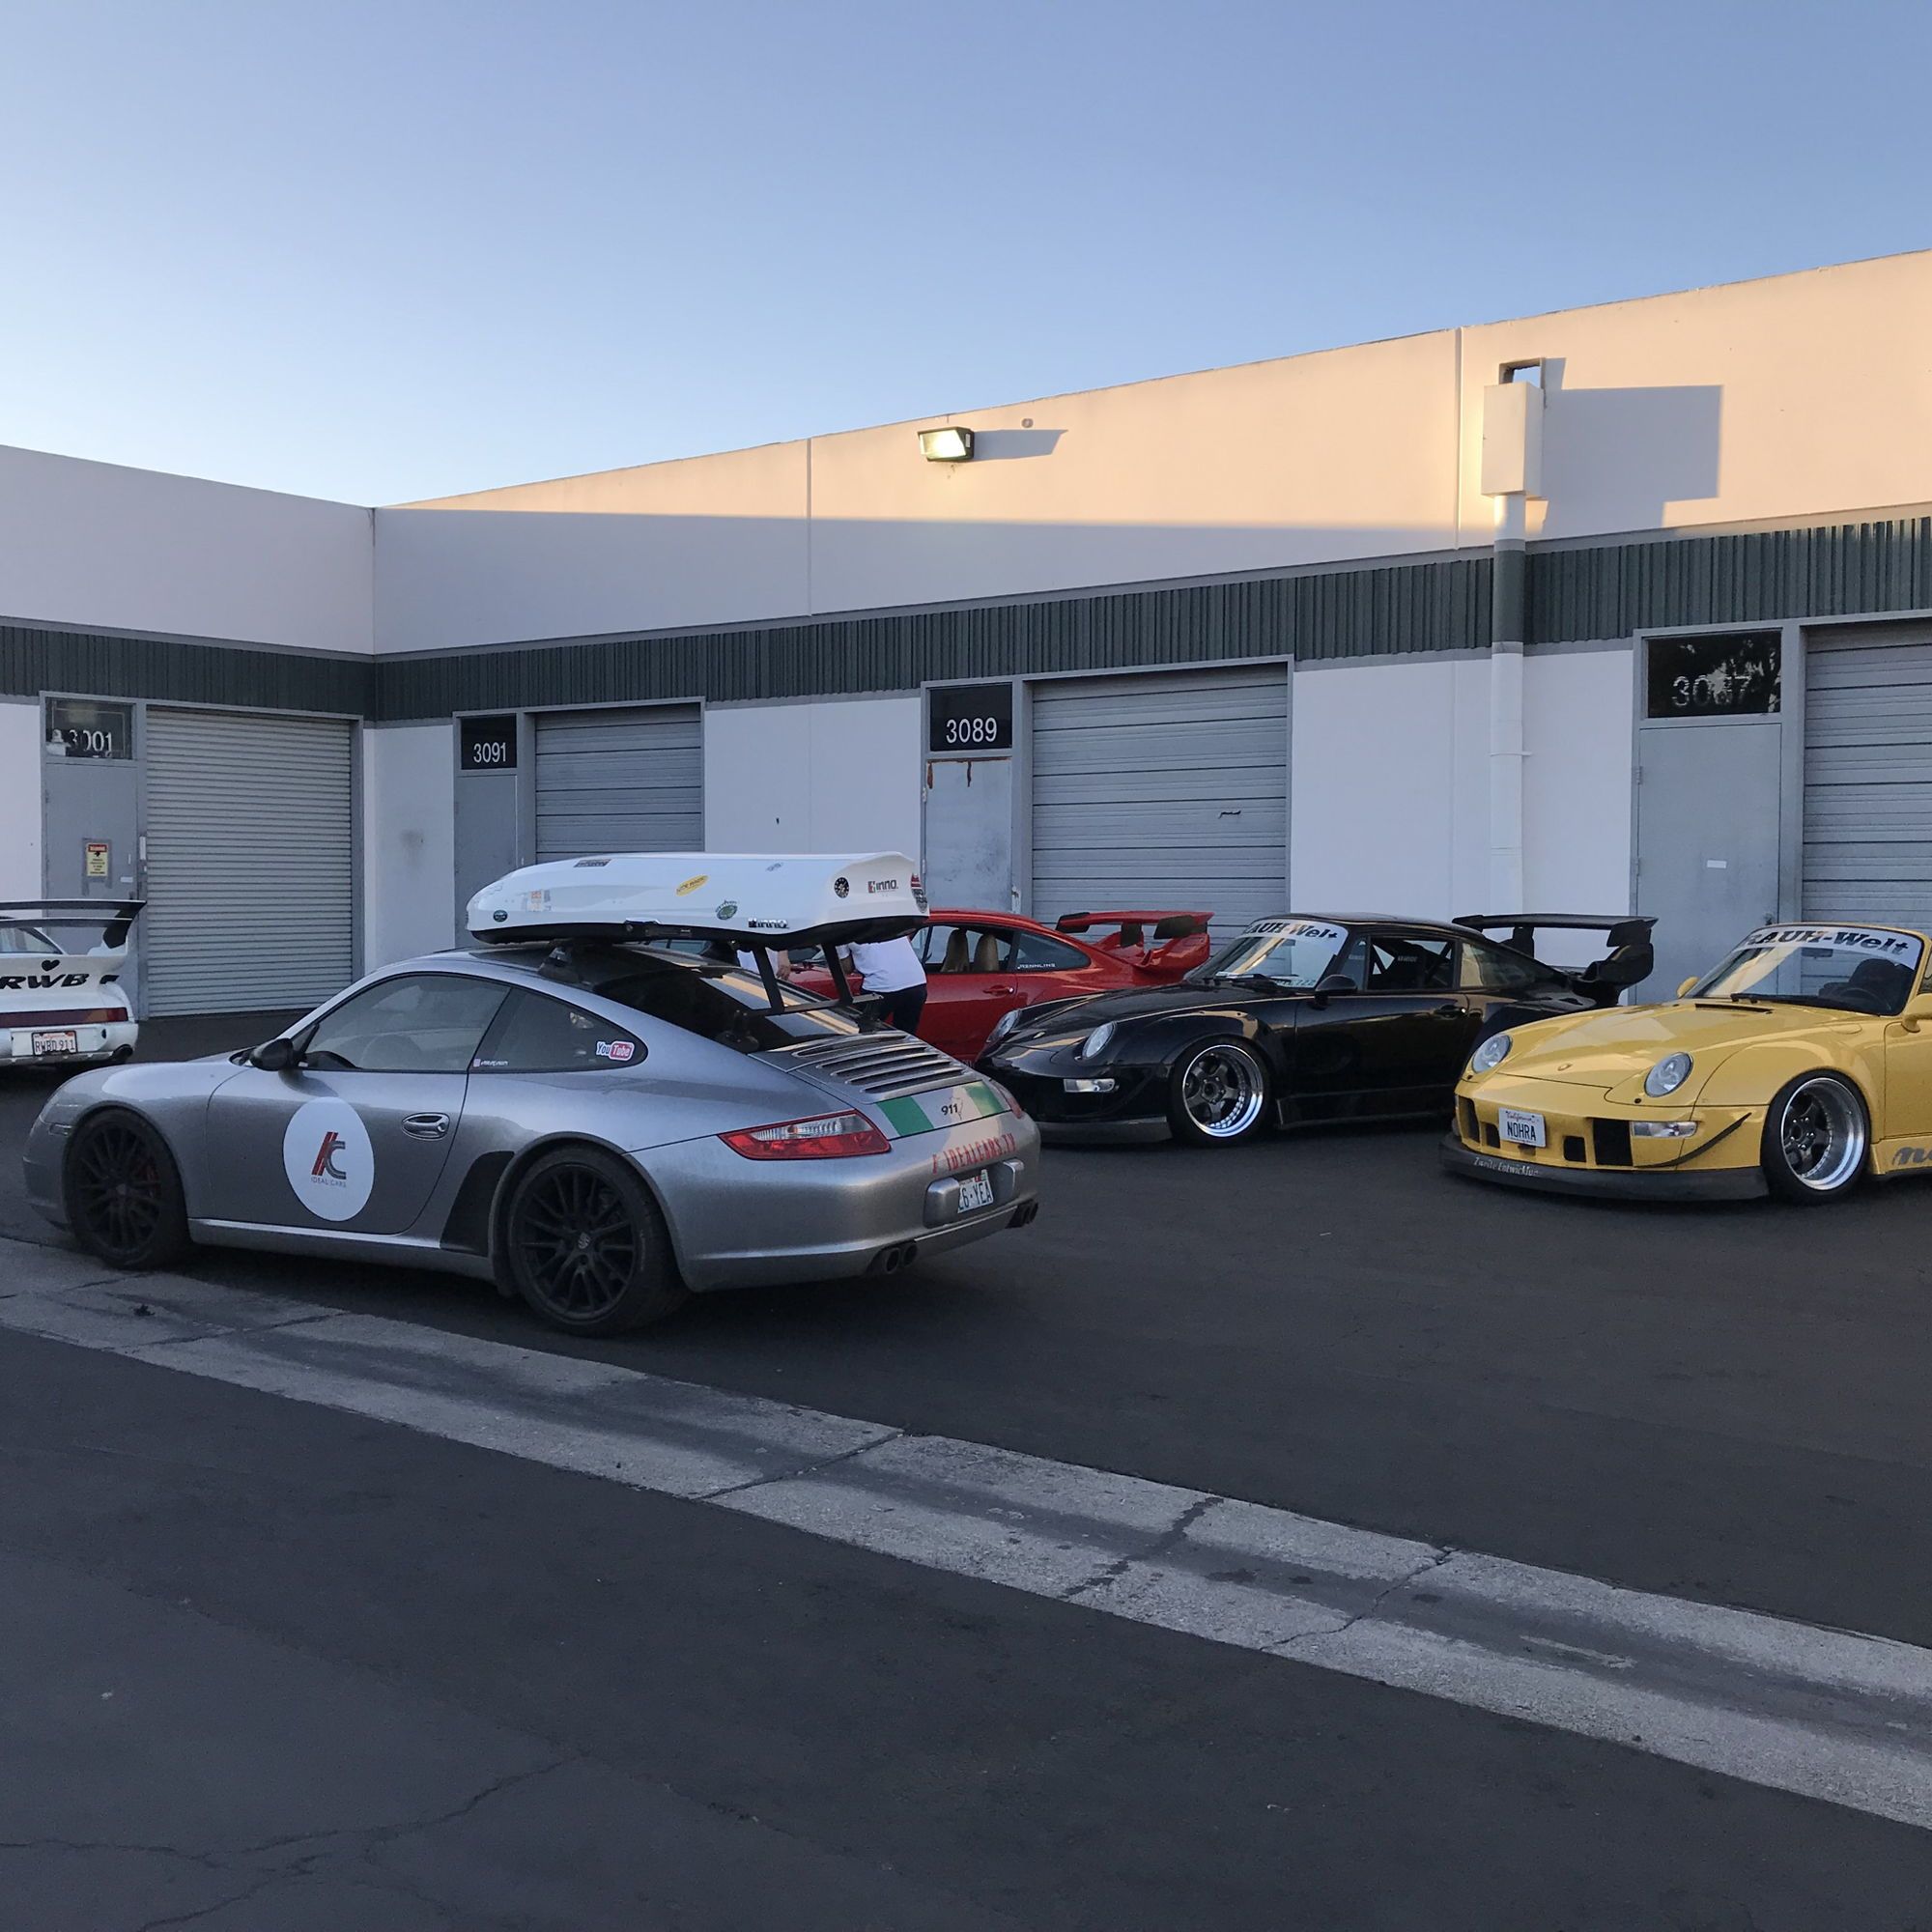 Silver Porsche 911 with surrounded by other classic 911s